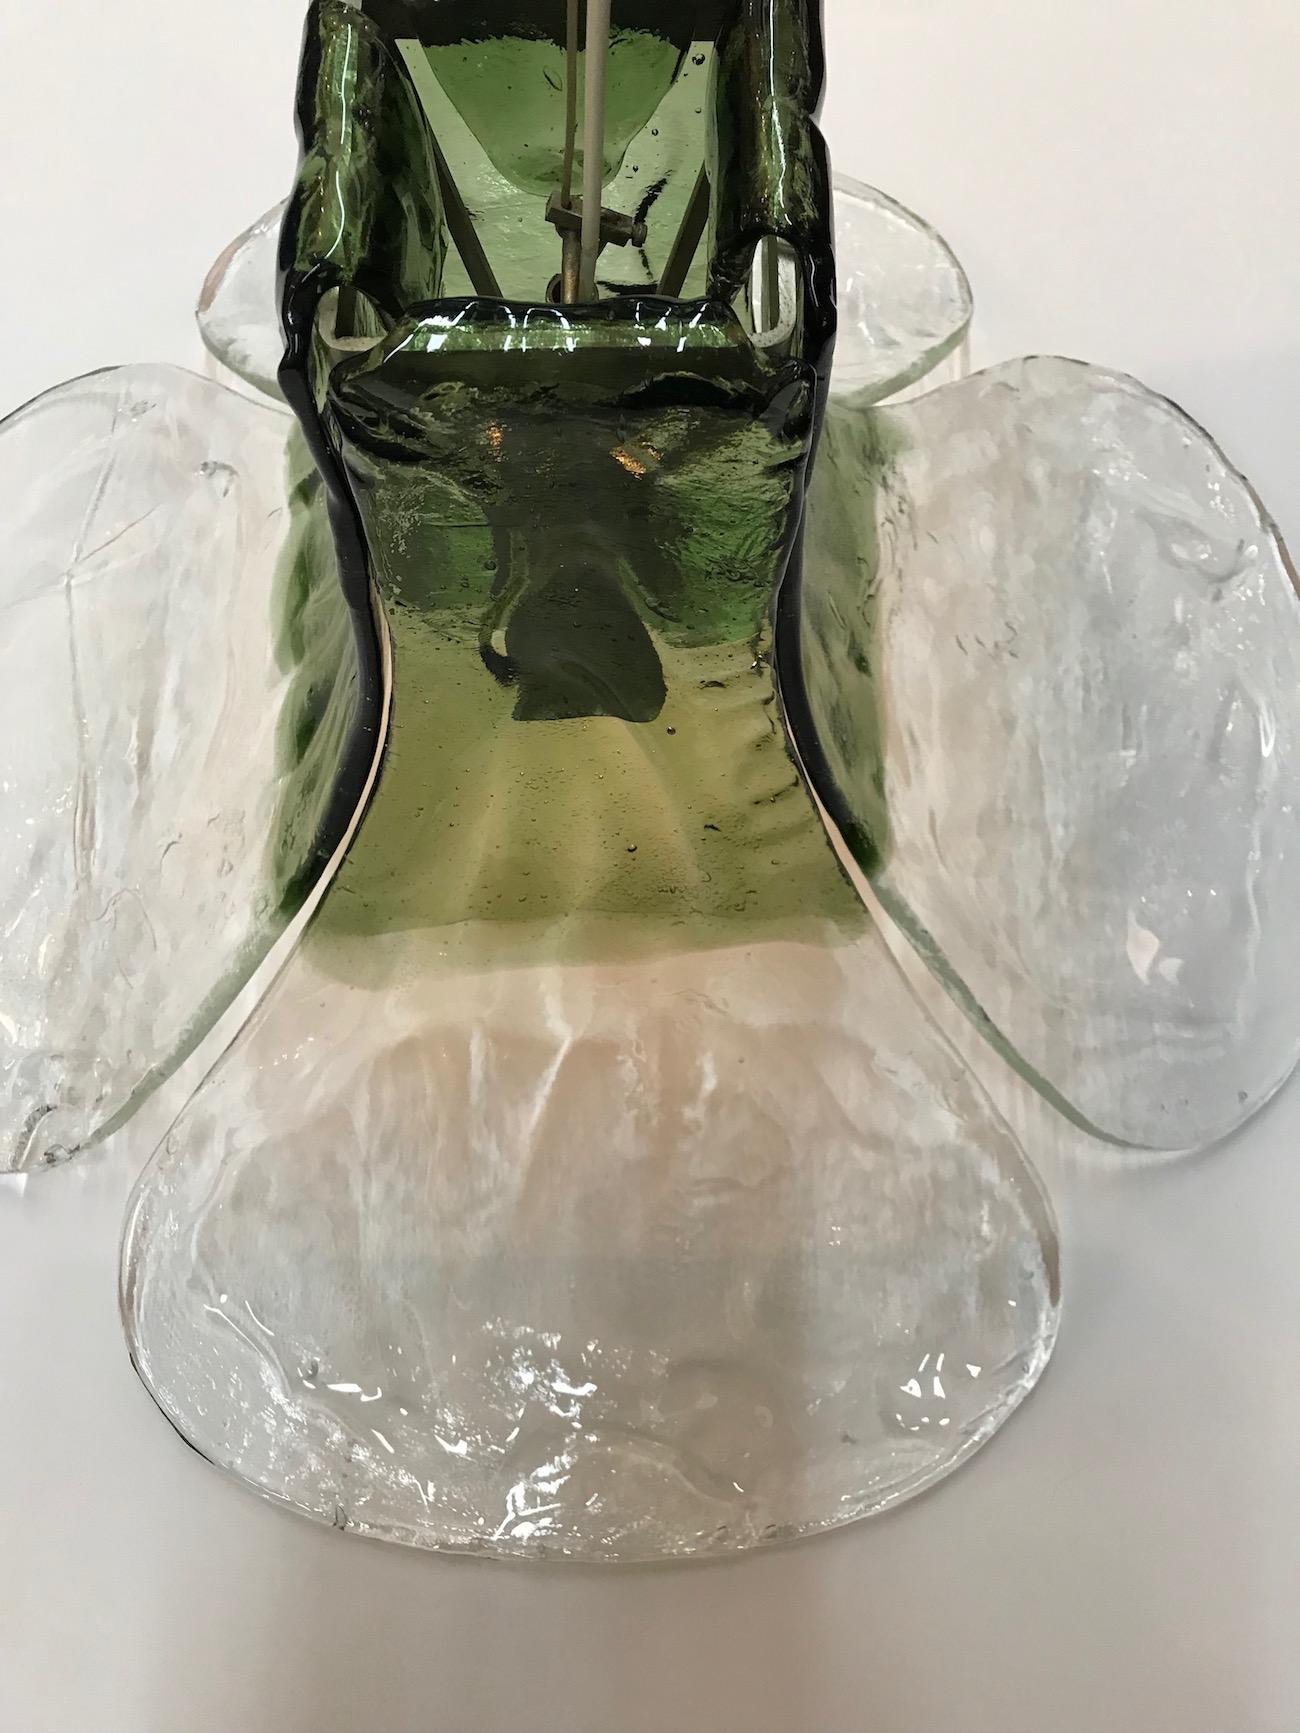 Known as model LS 185, this large glass light was designed in the 1970s by famed Italian designer Carlos Nason for the lighting house Mazzega. Each of the four glass petal is hand formed in clear with green color glass. The petals curve from the